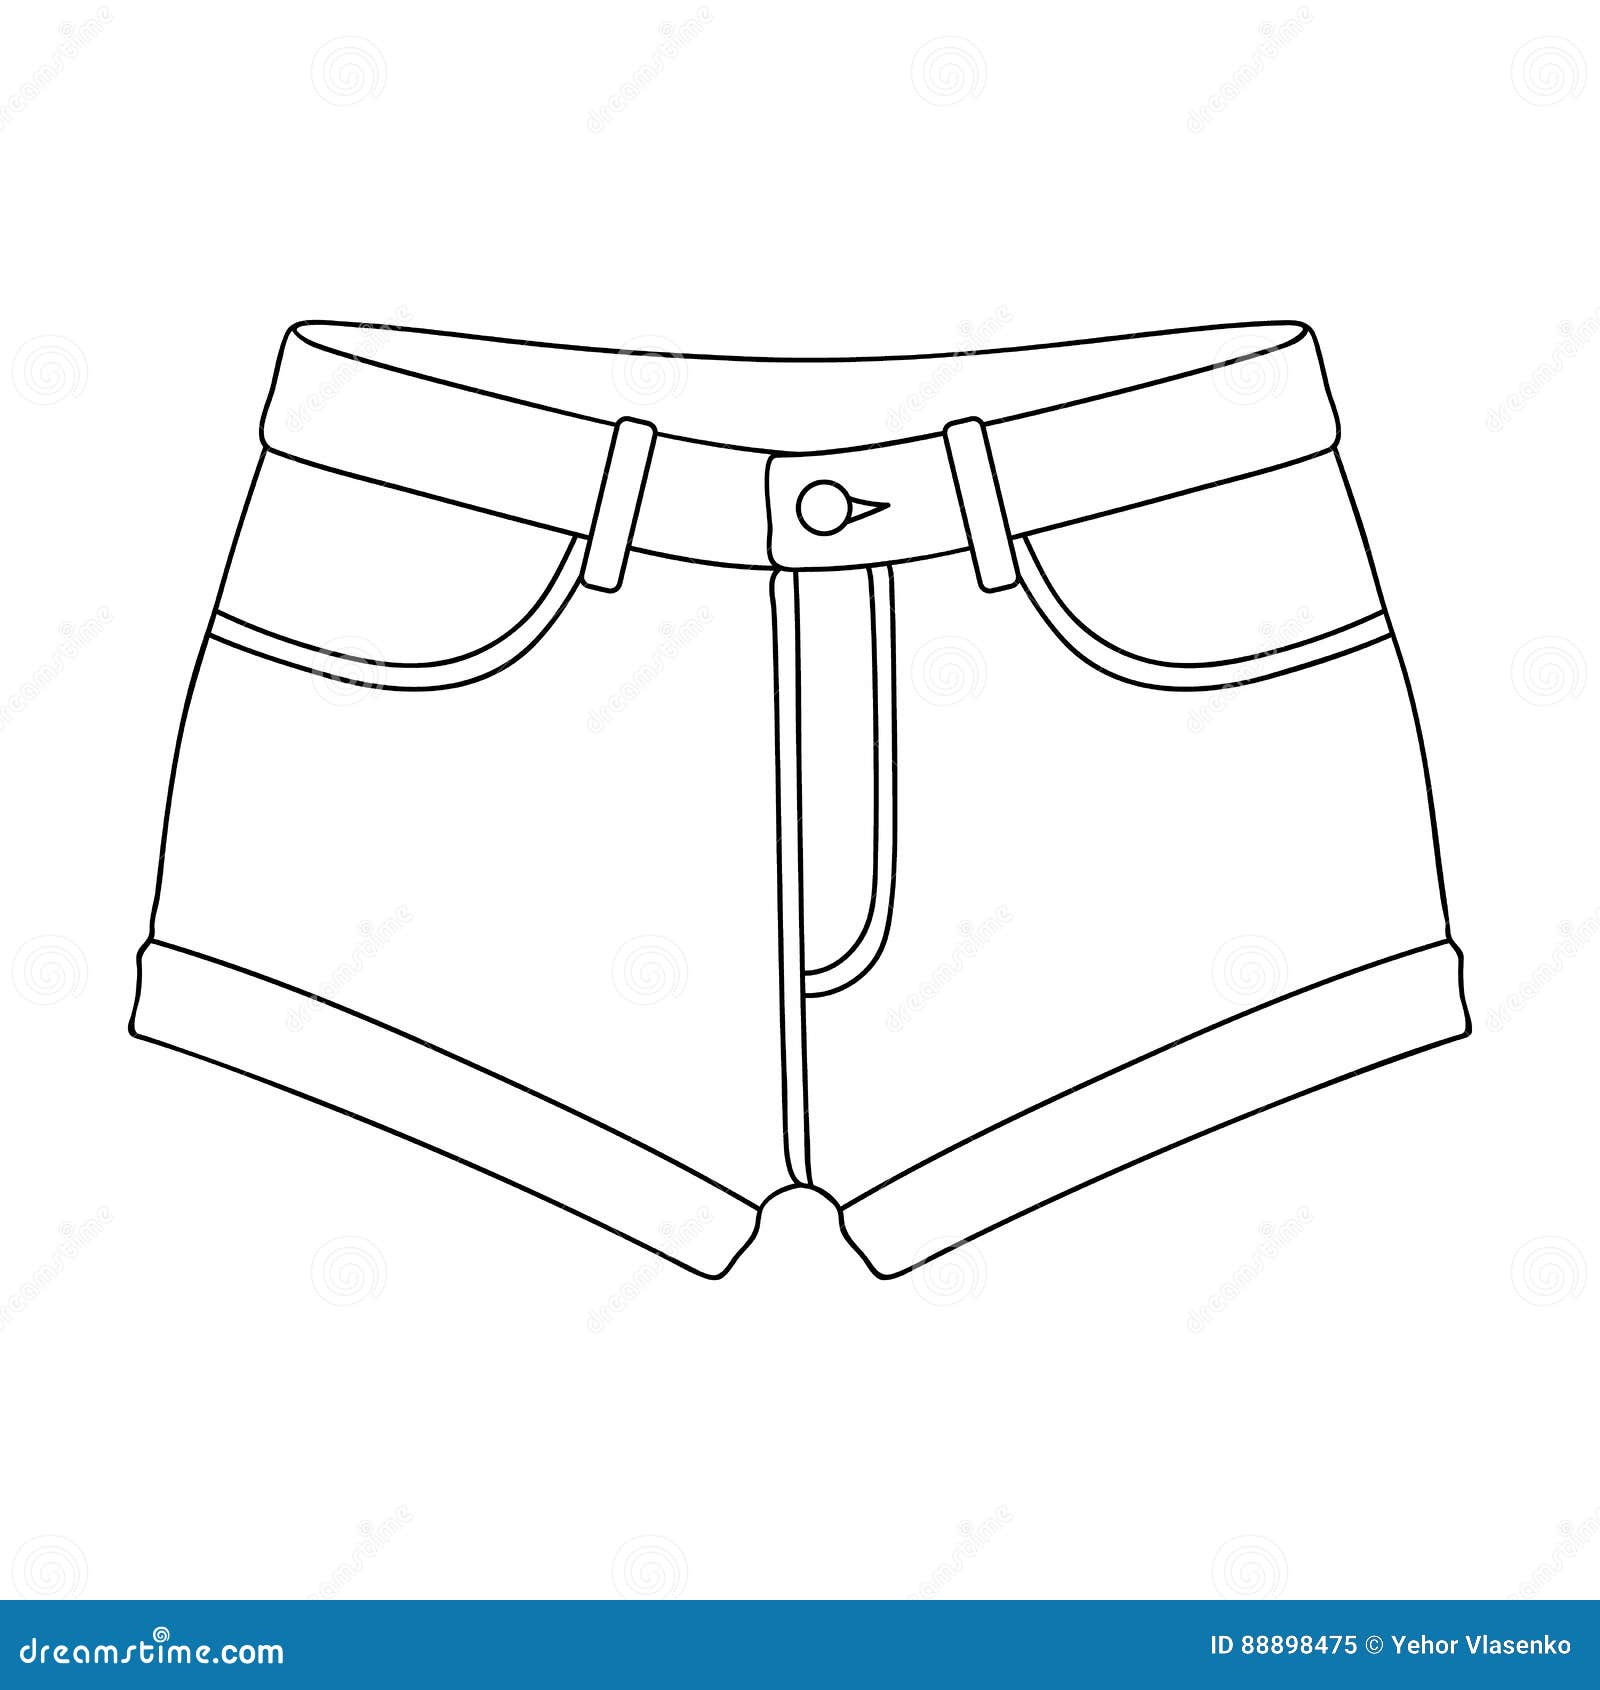 Basketball Shorts Outline Sketch Coloring Page